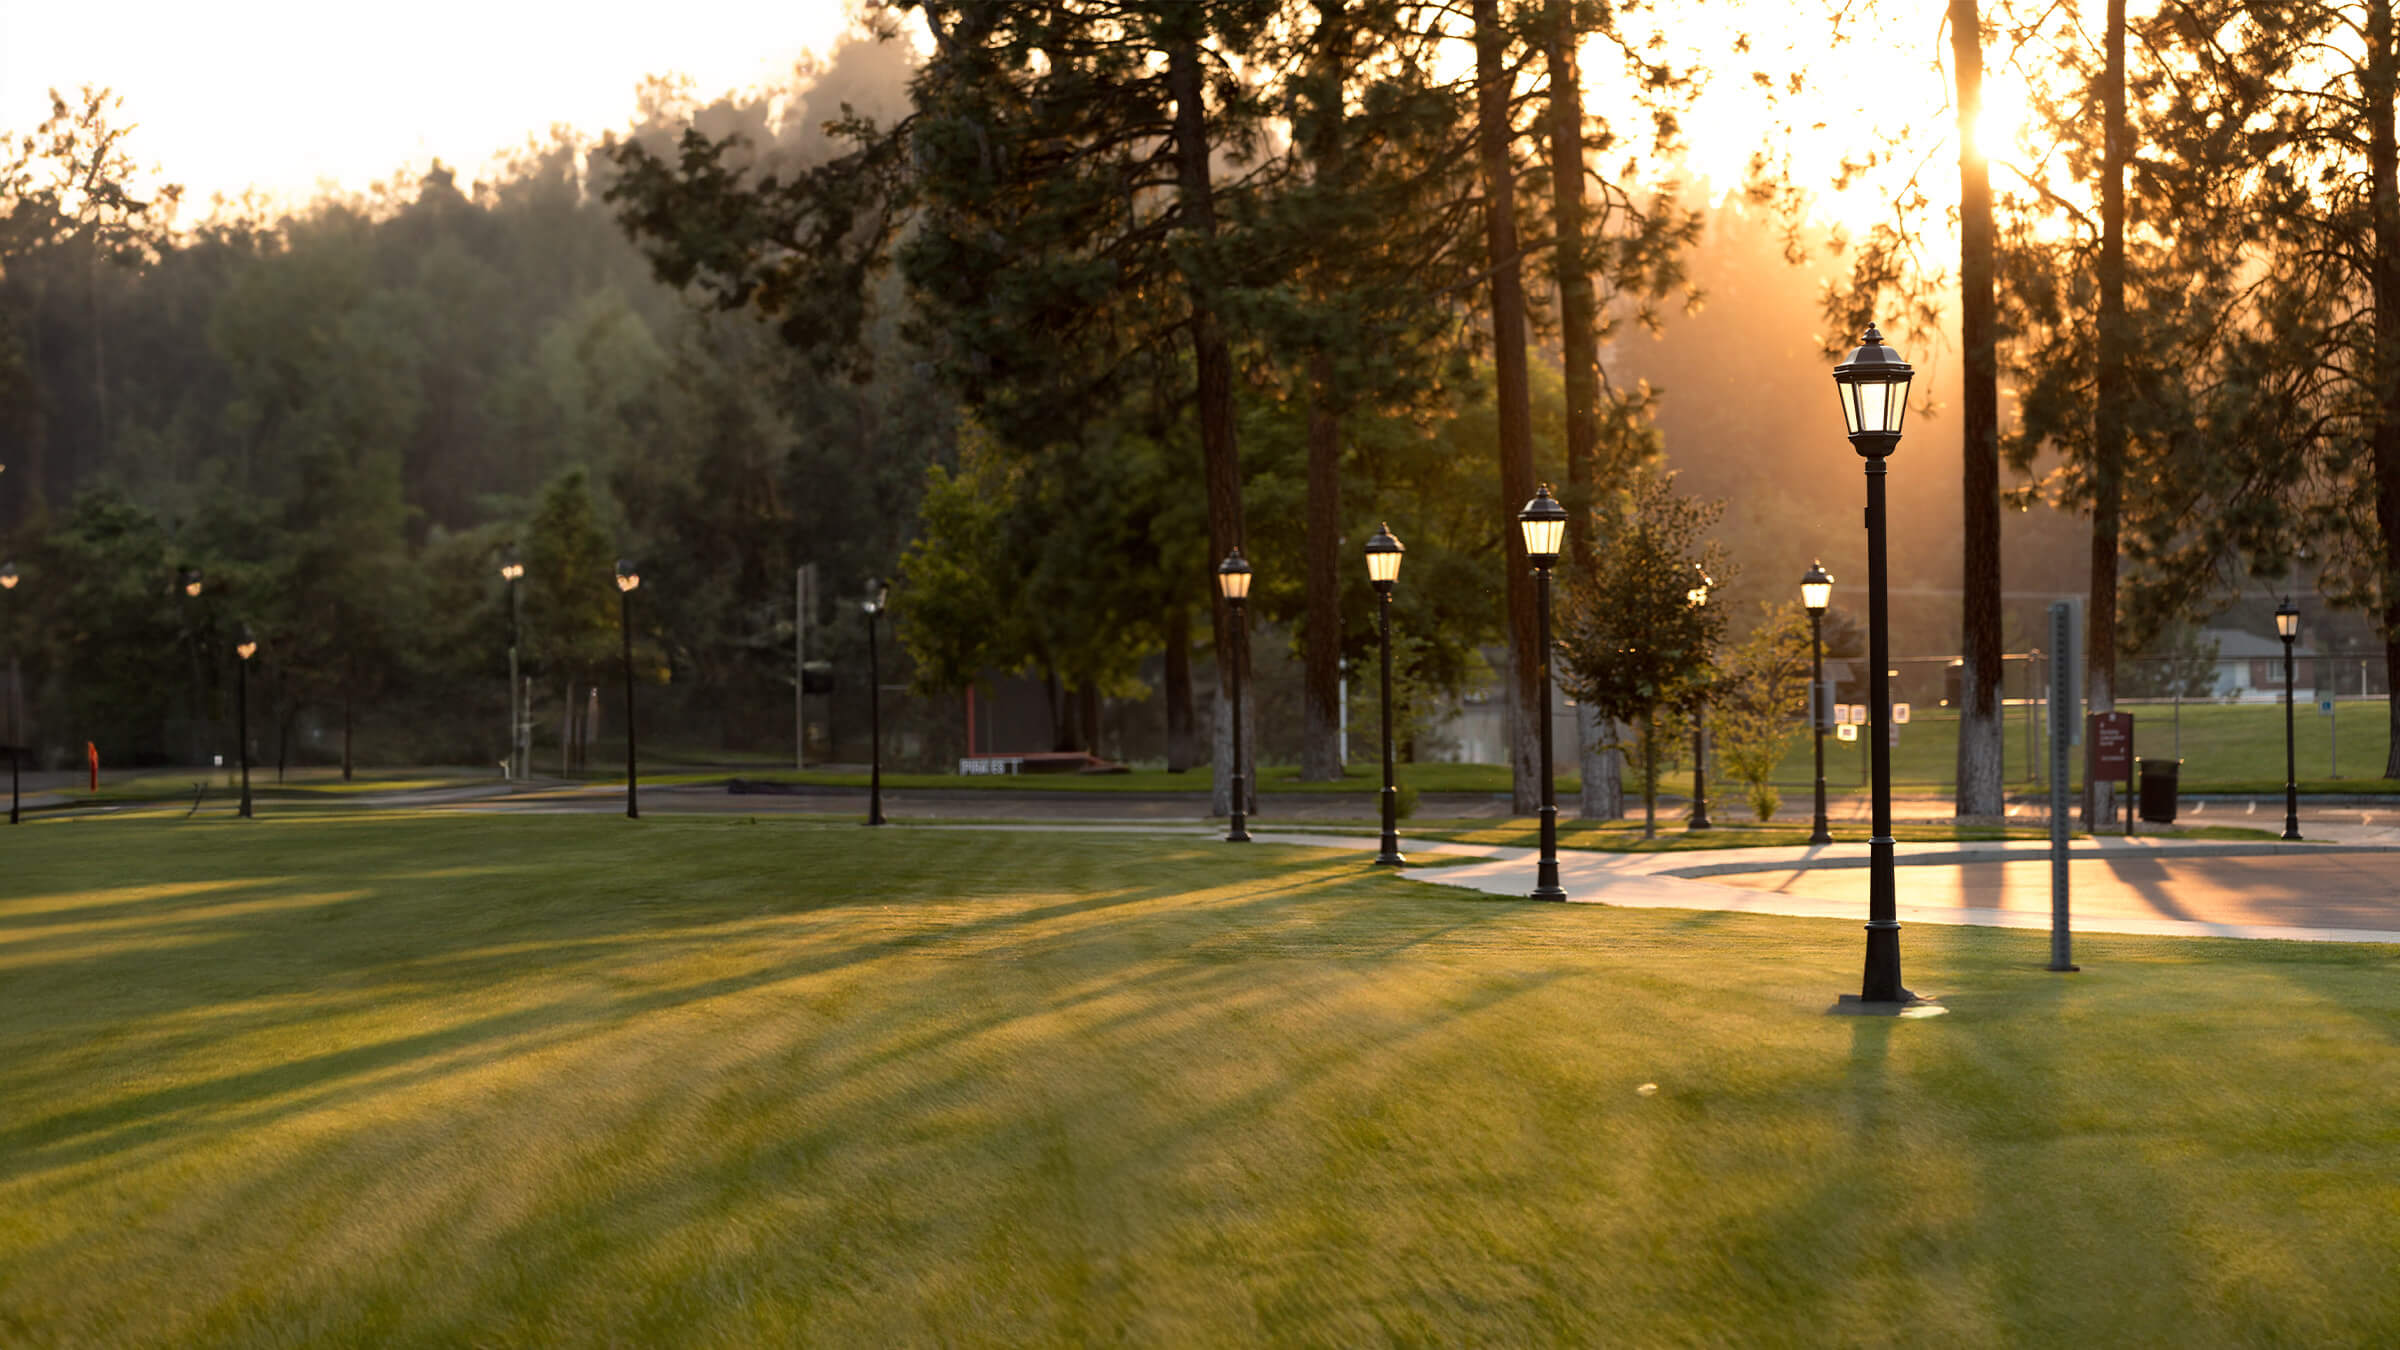 Long shadows fall on manicured grass between tall trees and lit lamp posts in the morning.